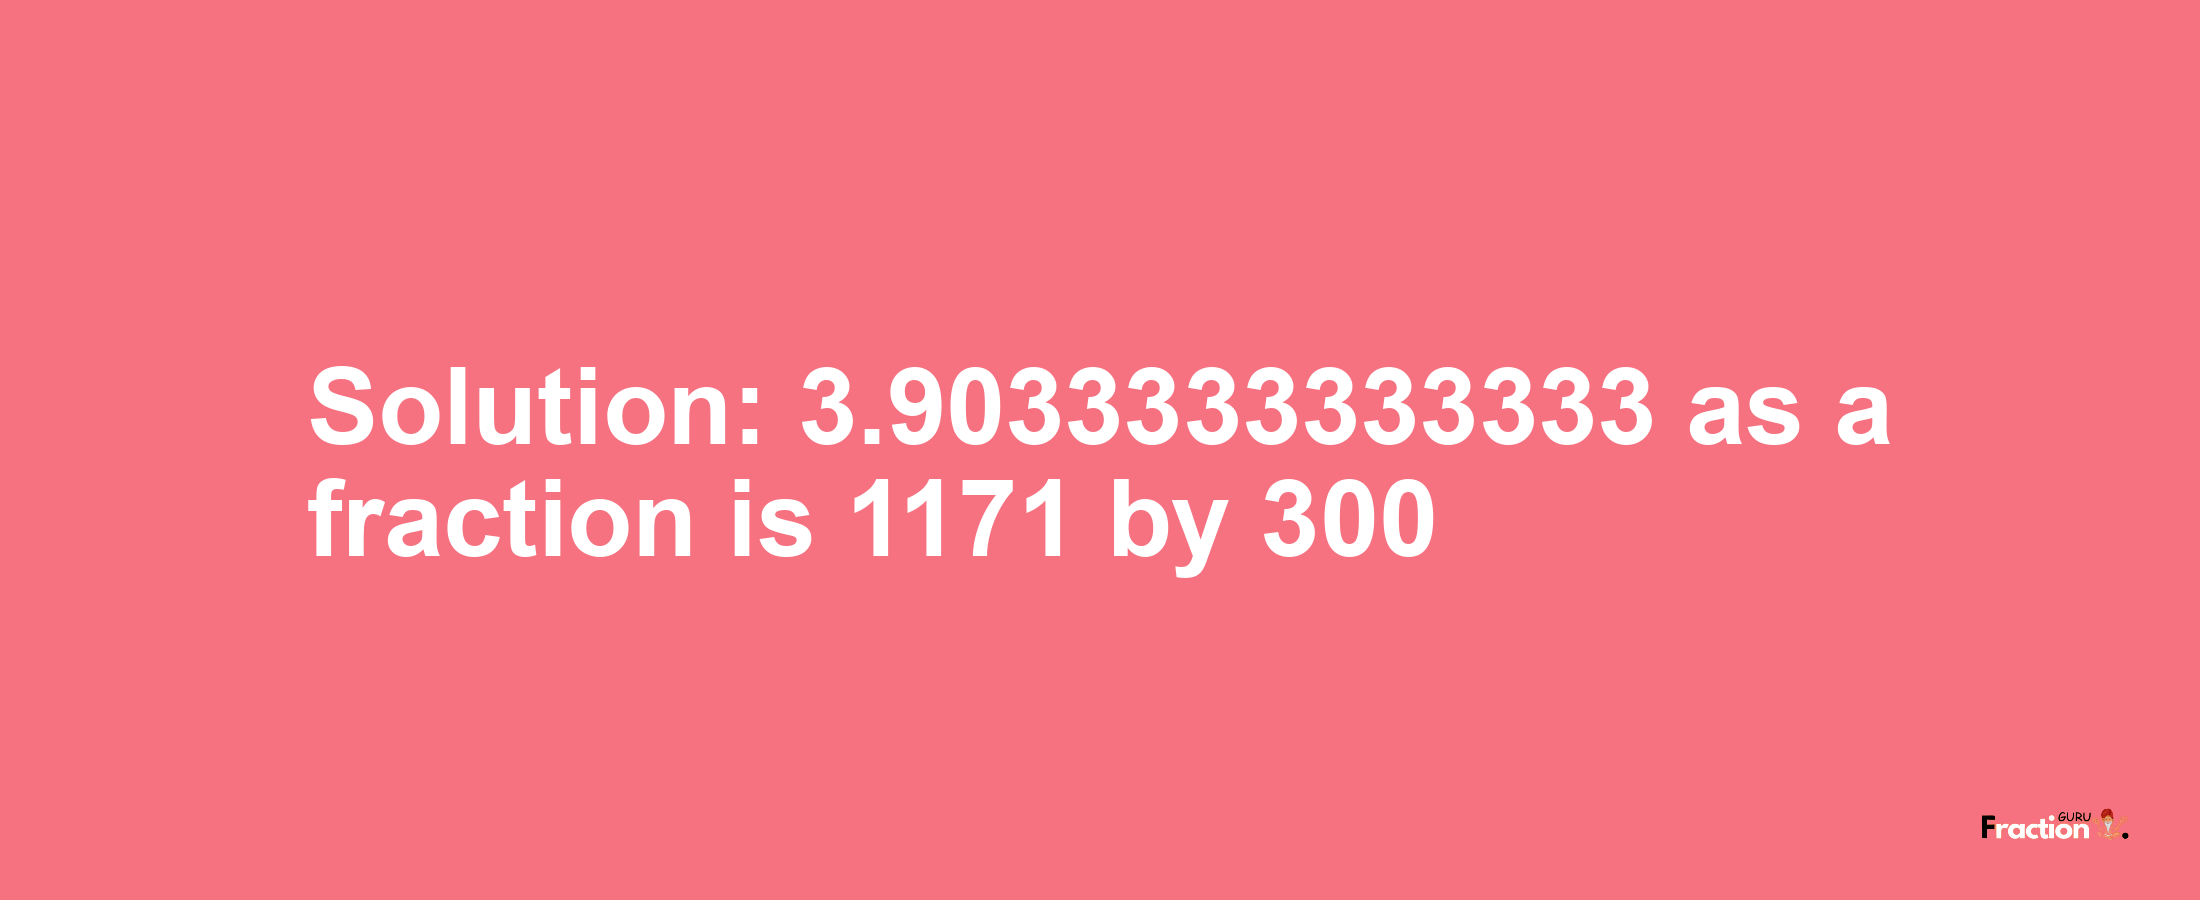 Solution:3.9033333333333 as a fraction is 1171/300